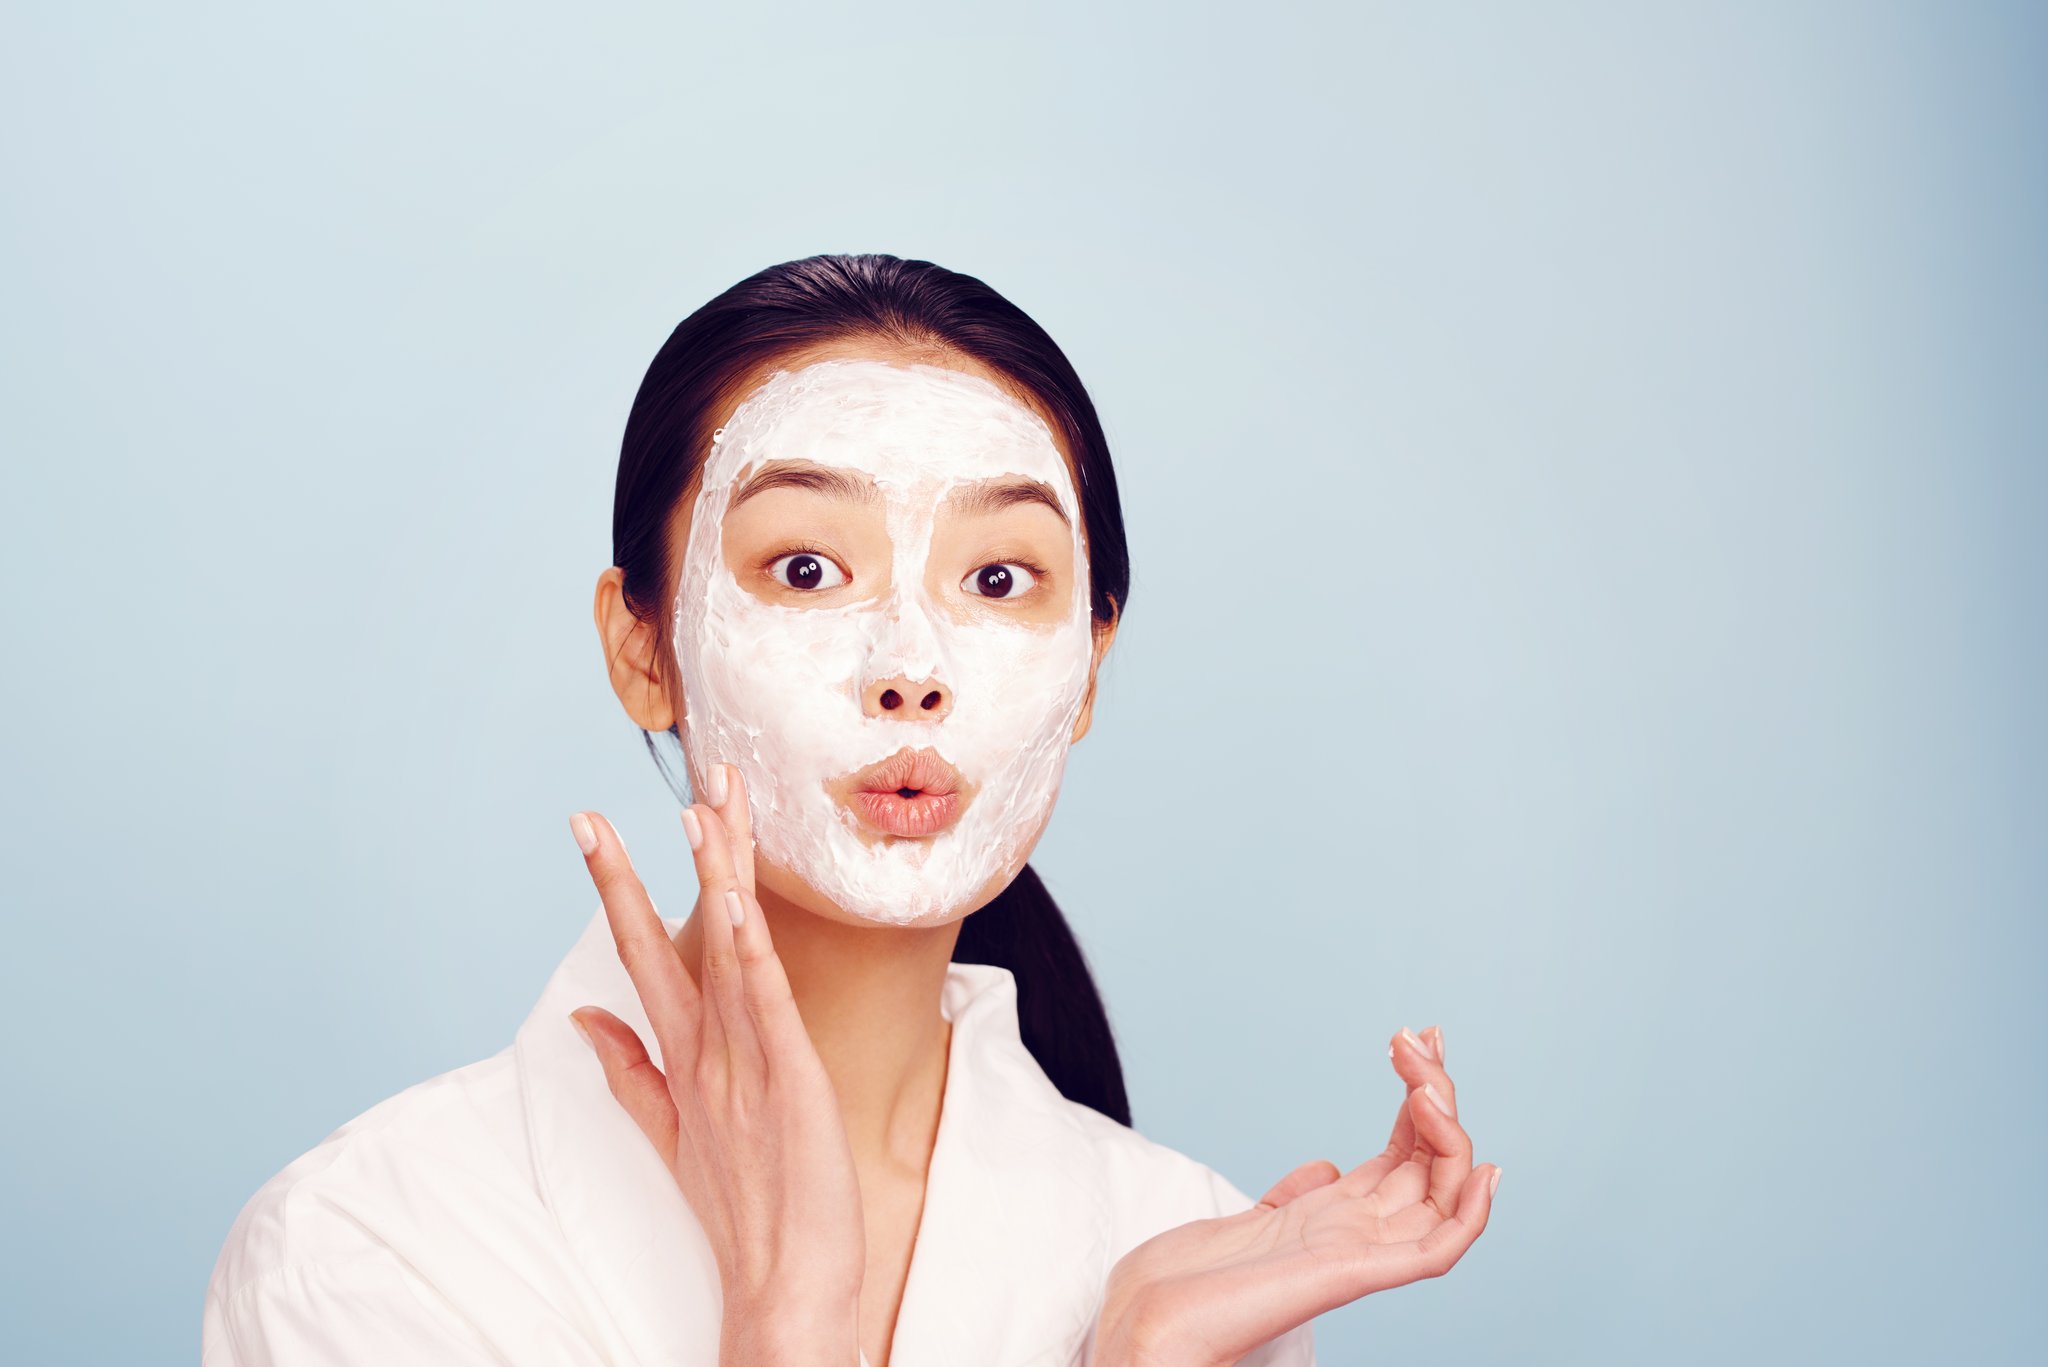 How to Layer Skincare Products For Dry Skin | POPSUGAR Beauty